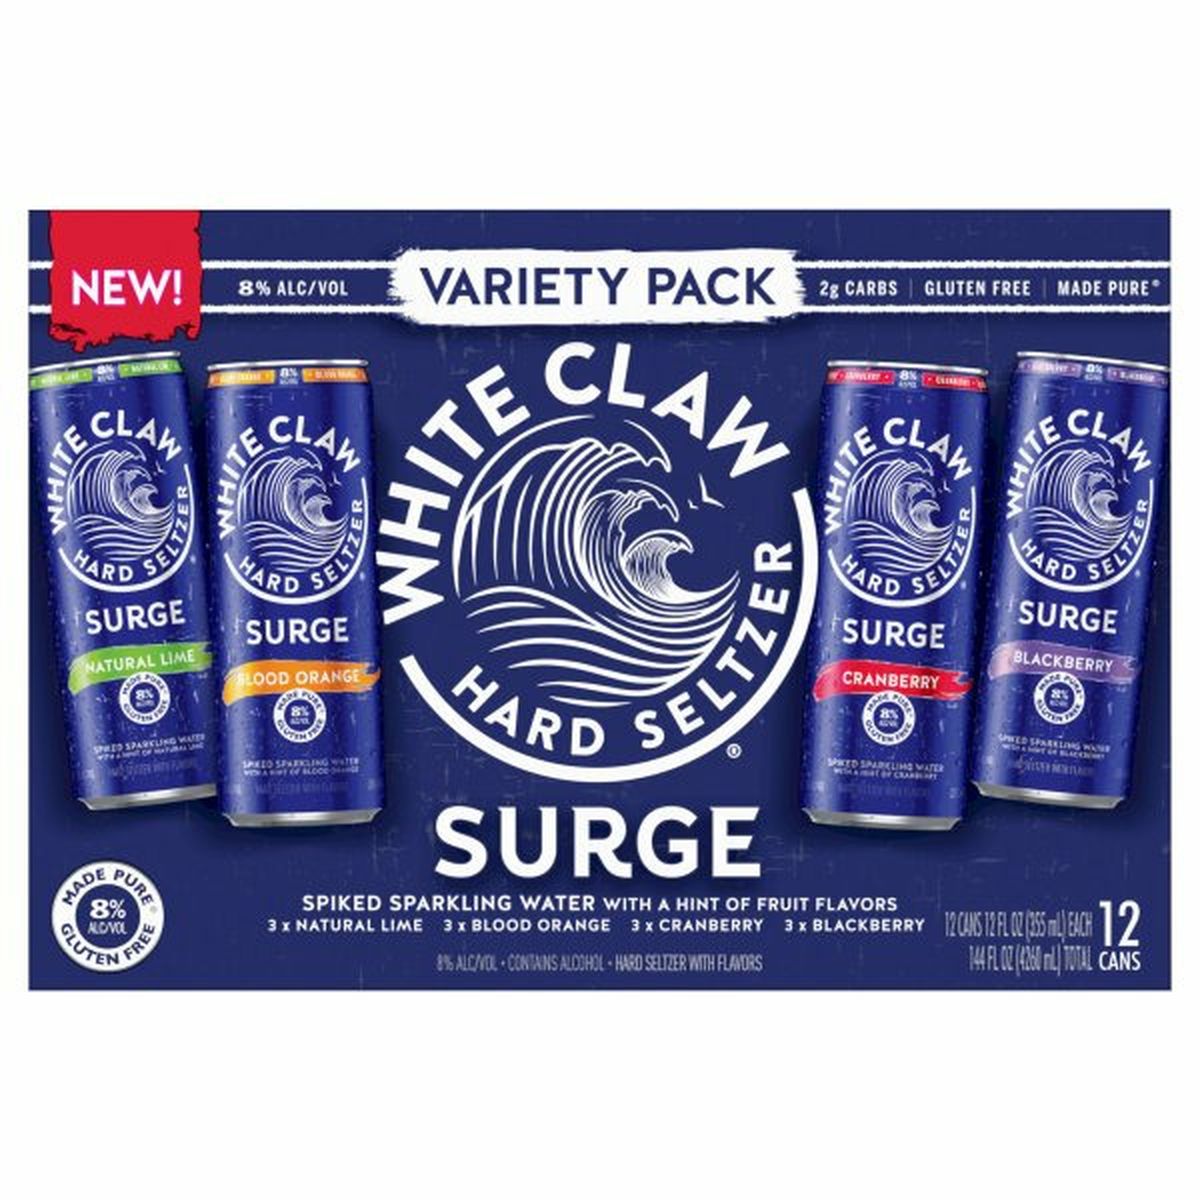 Calories in White Claw Surge Hard Seltzer Variety 12/12oz cans